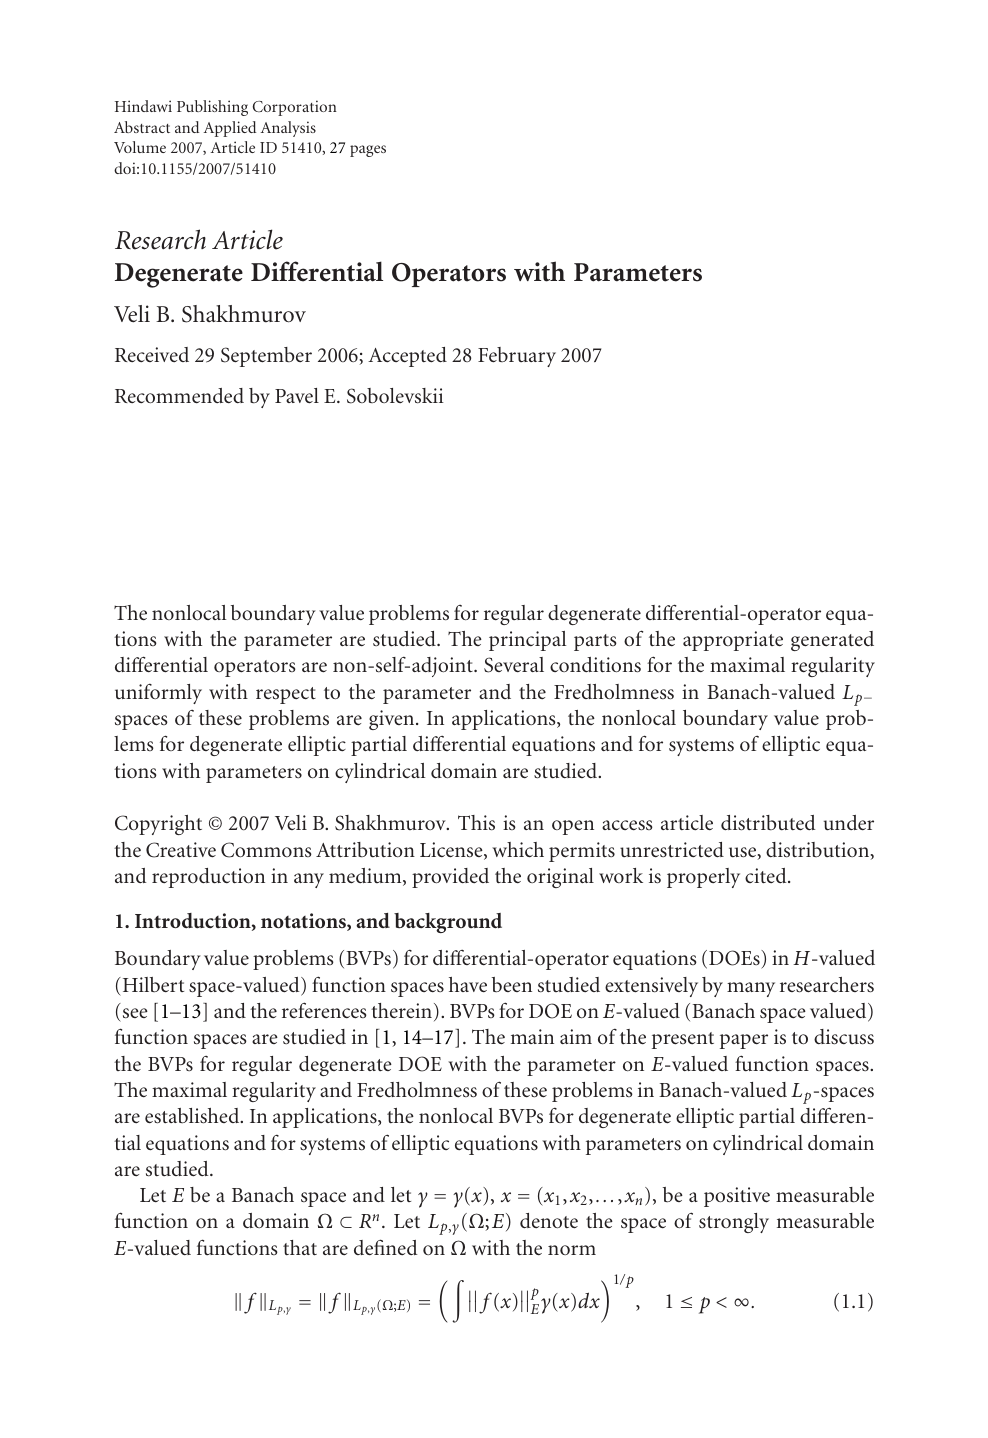 Degenerate Differential Operators With Parameters Topic Of Research Paper In Mathematics Download Scholarly Article Pdf And Read For Free On Cyberleninka Open Science Hub